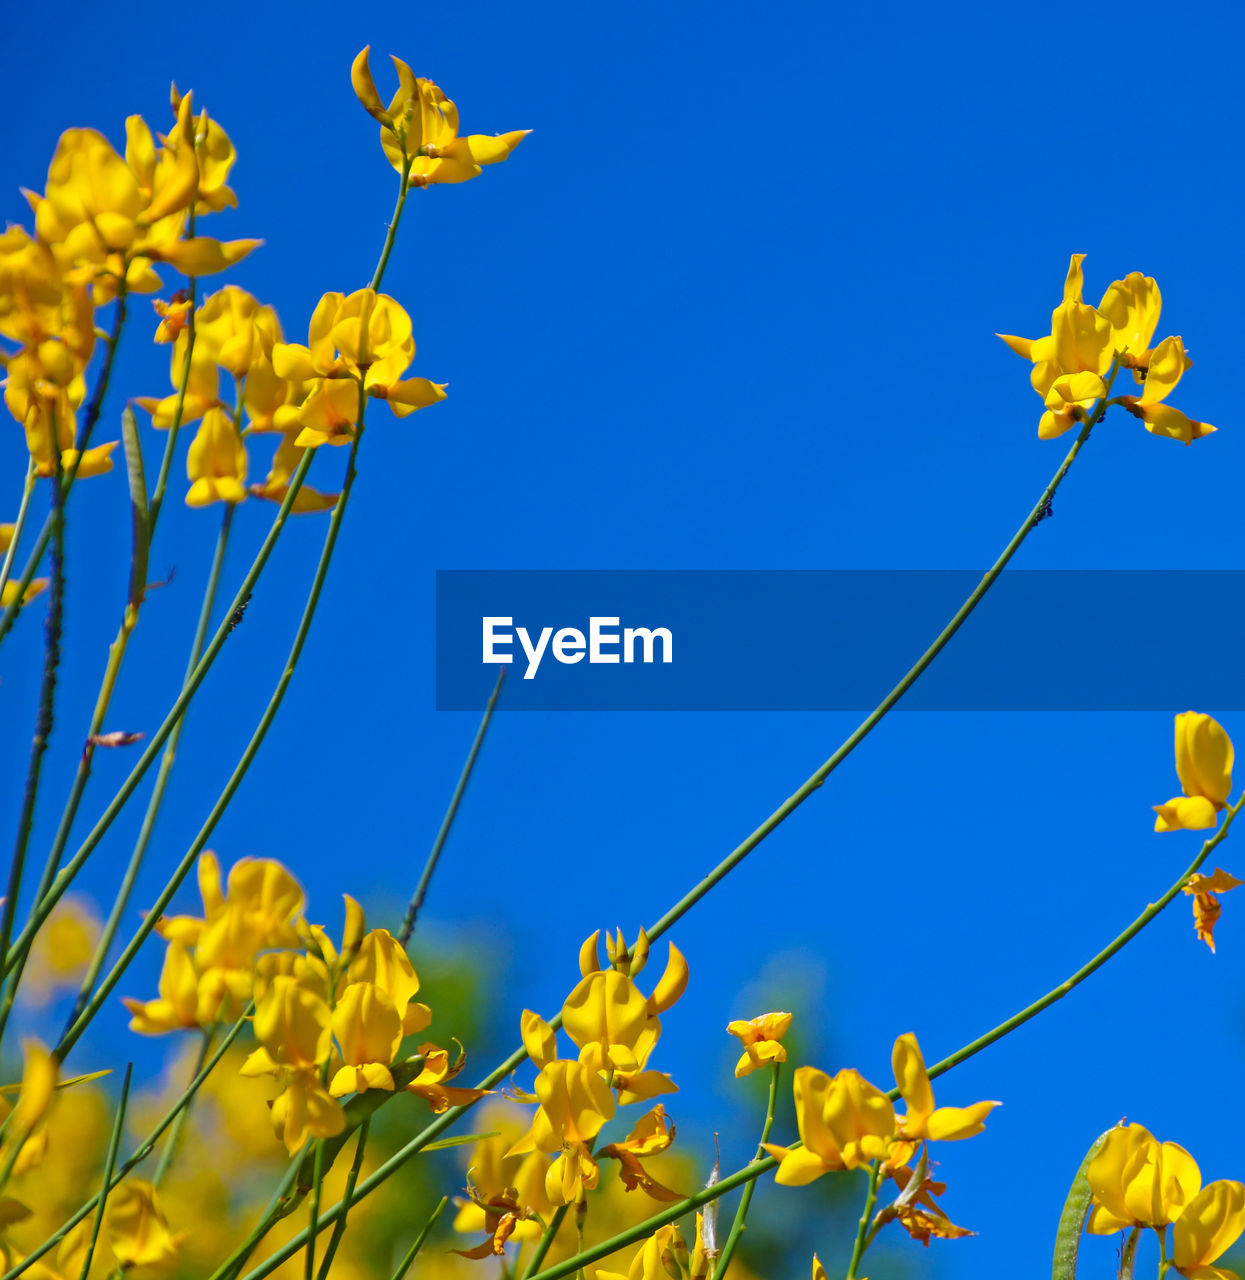 CLOSE-UP OF YELLOW FLOWERING PLANT AGAINST BLUE SKY